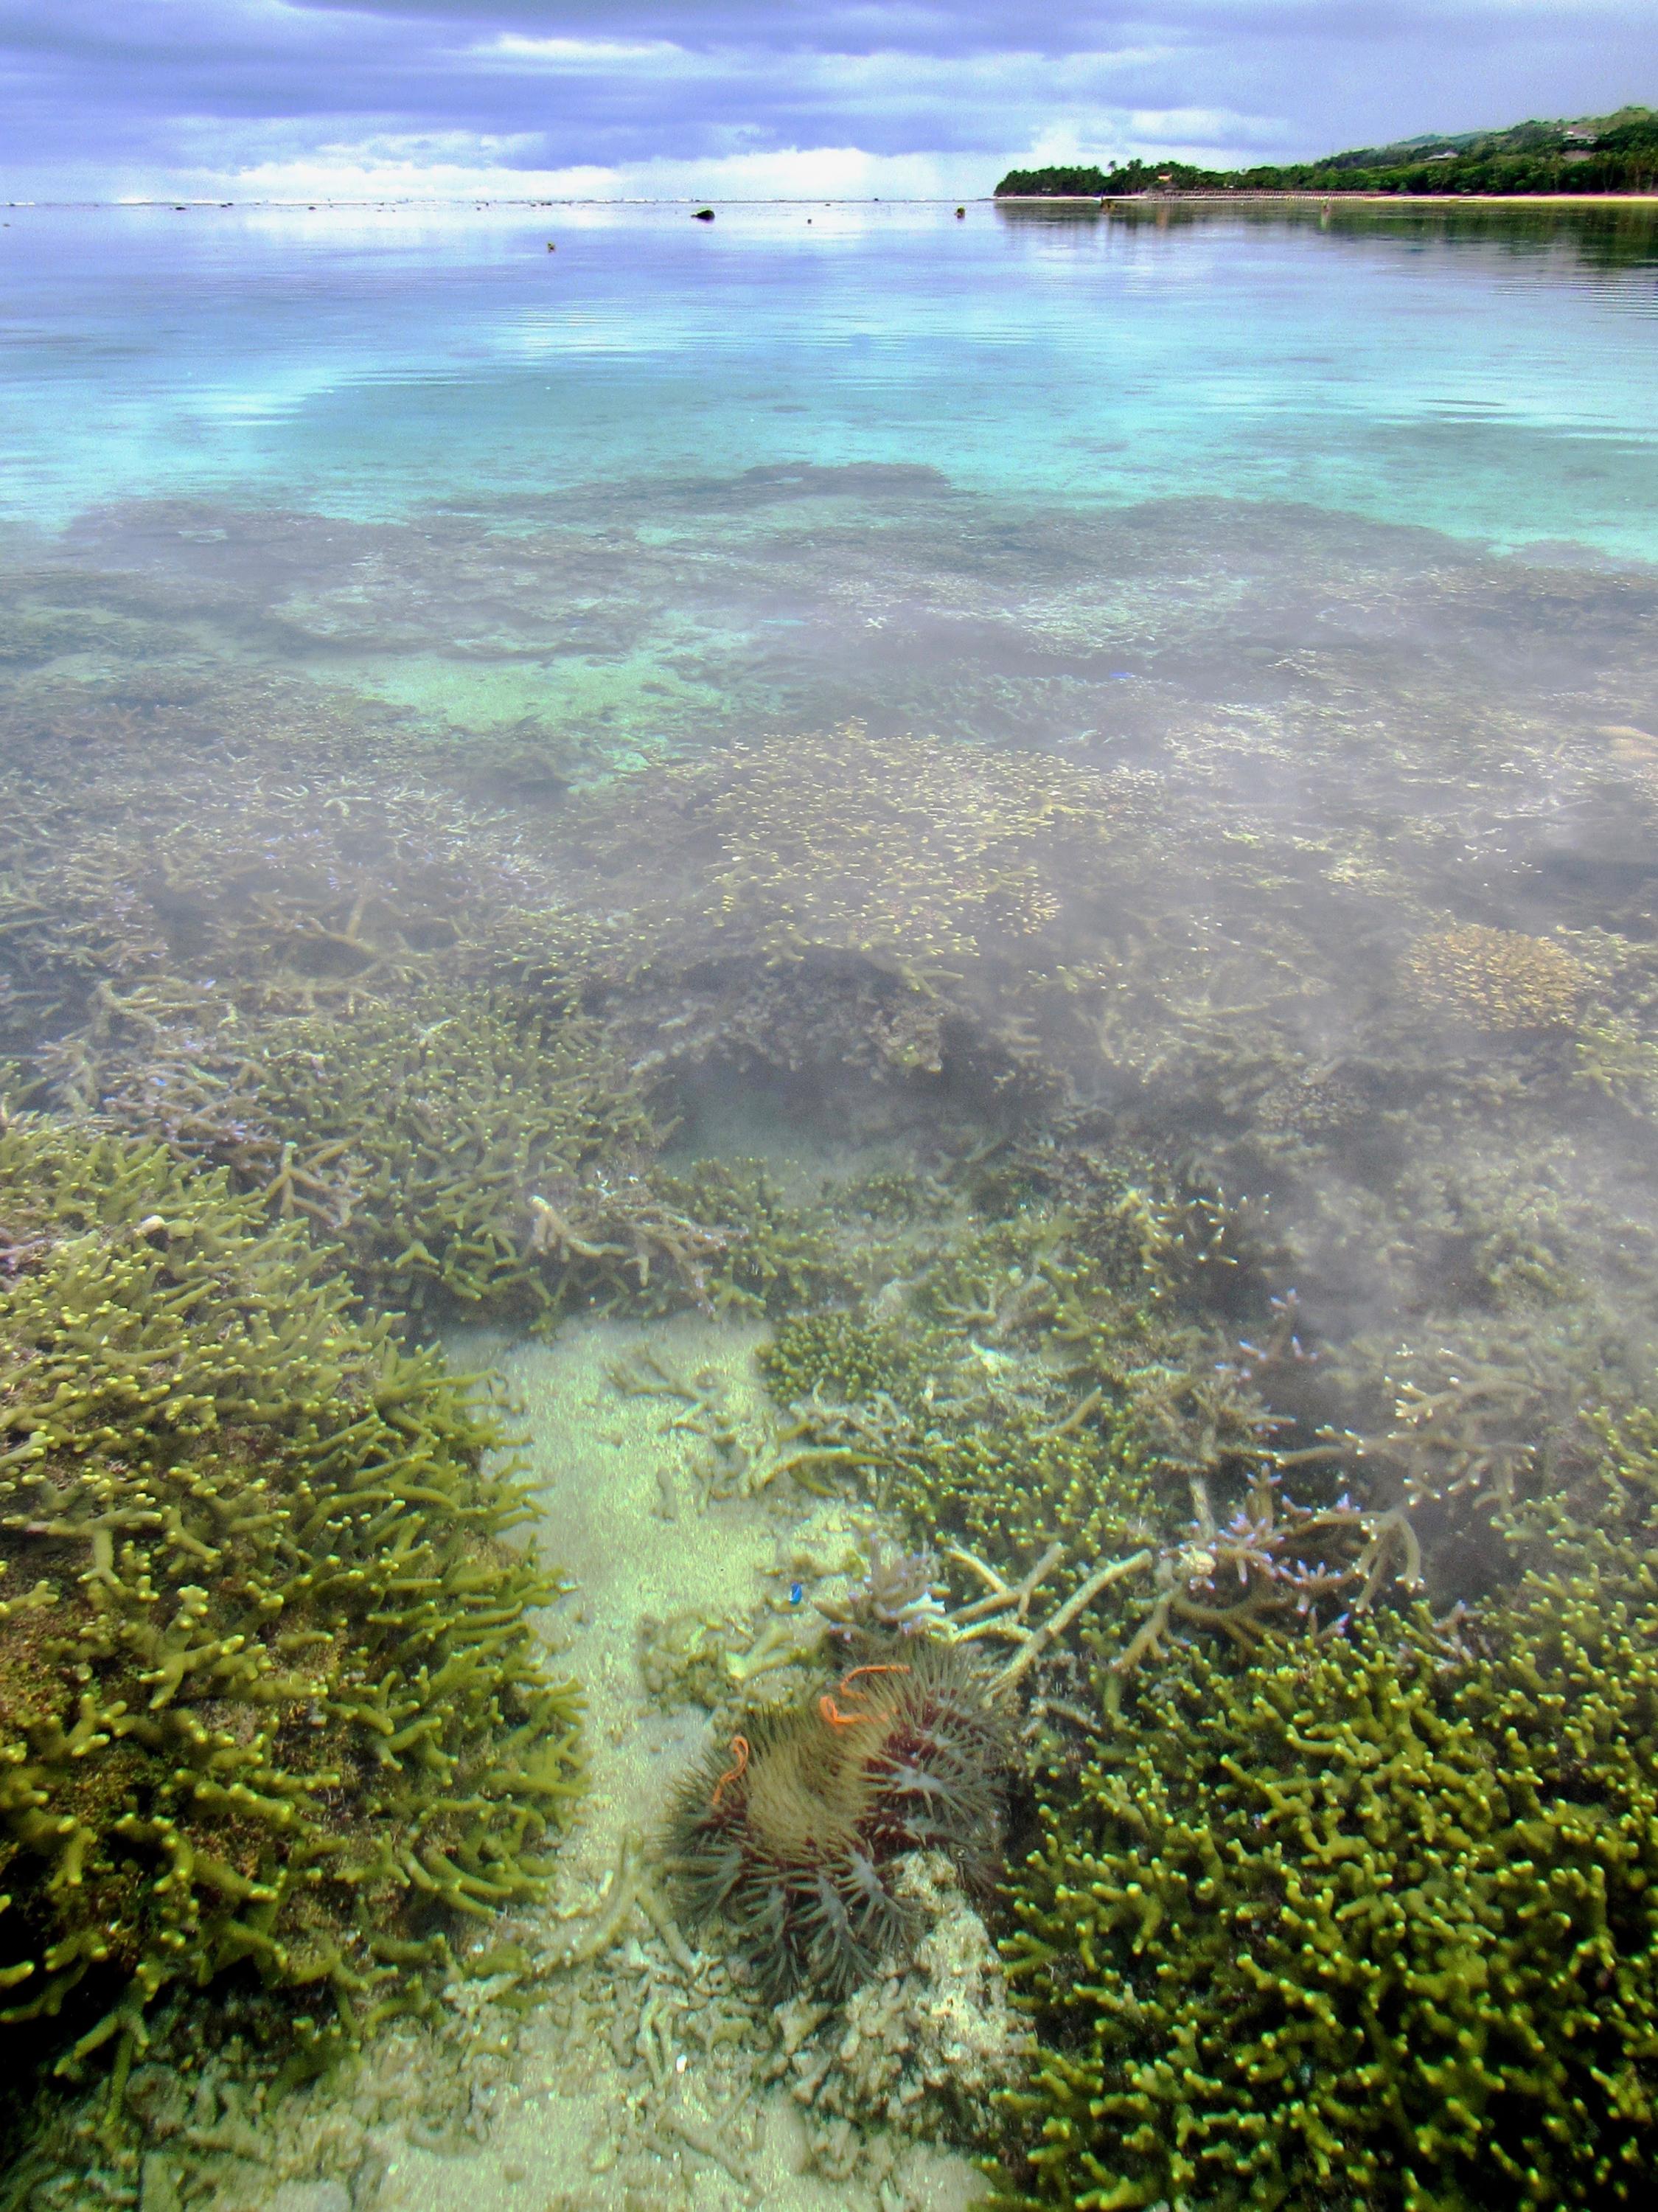 A tagged sea star is shown in the lower center part of this view of the Coral Coast of the Fiji Islands. Researchers tracked sea stars to see if they preferred marine protected areas or fished areas. (Credit: Cody Clements, Georgia Tech)